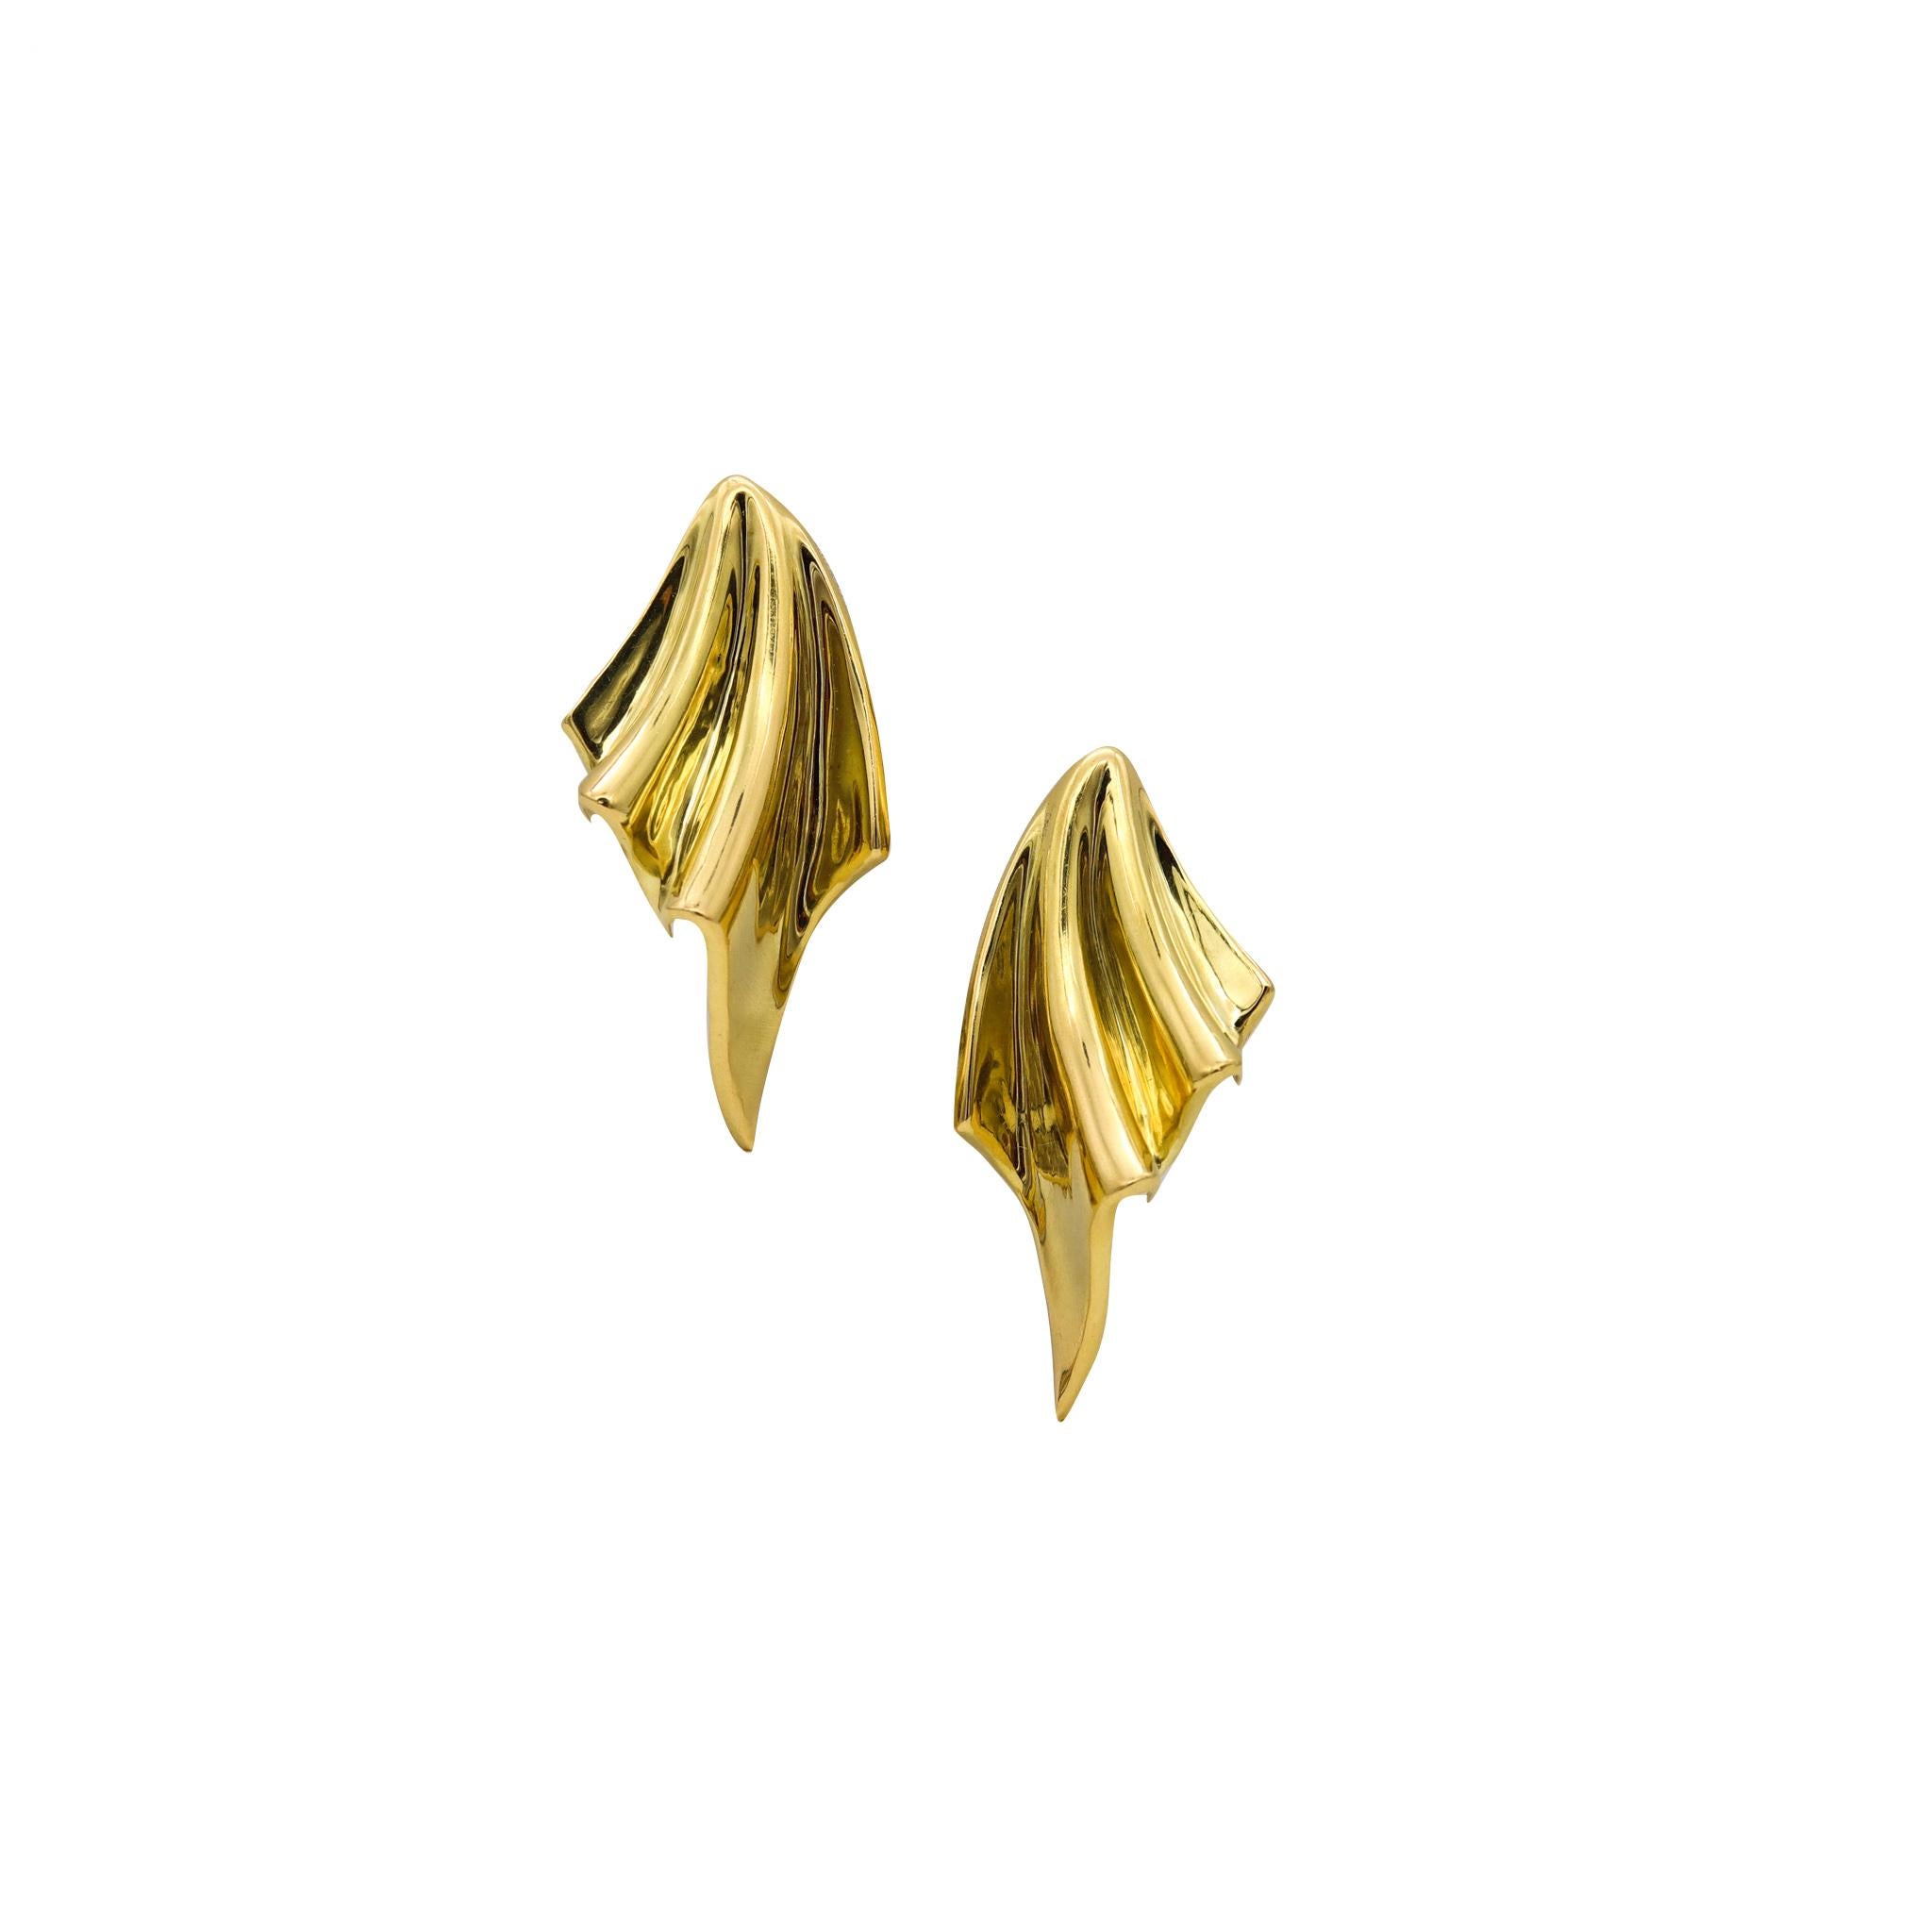 Drapery Clips-Earrings designed by Roberto Legnazzi.

Beautiful pair created in Italy at the atelier of Roberto Legnazzi. It was crafted in solid yellow gold of 18 karats, with high polished finish. Suited with post for pierced ears and comfortable